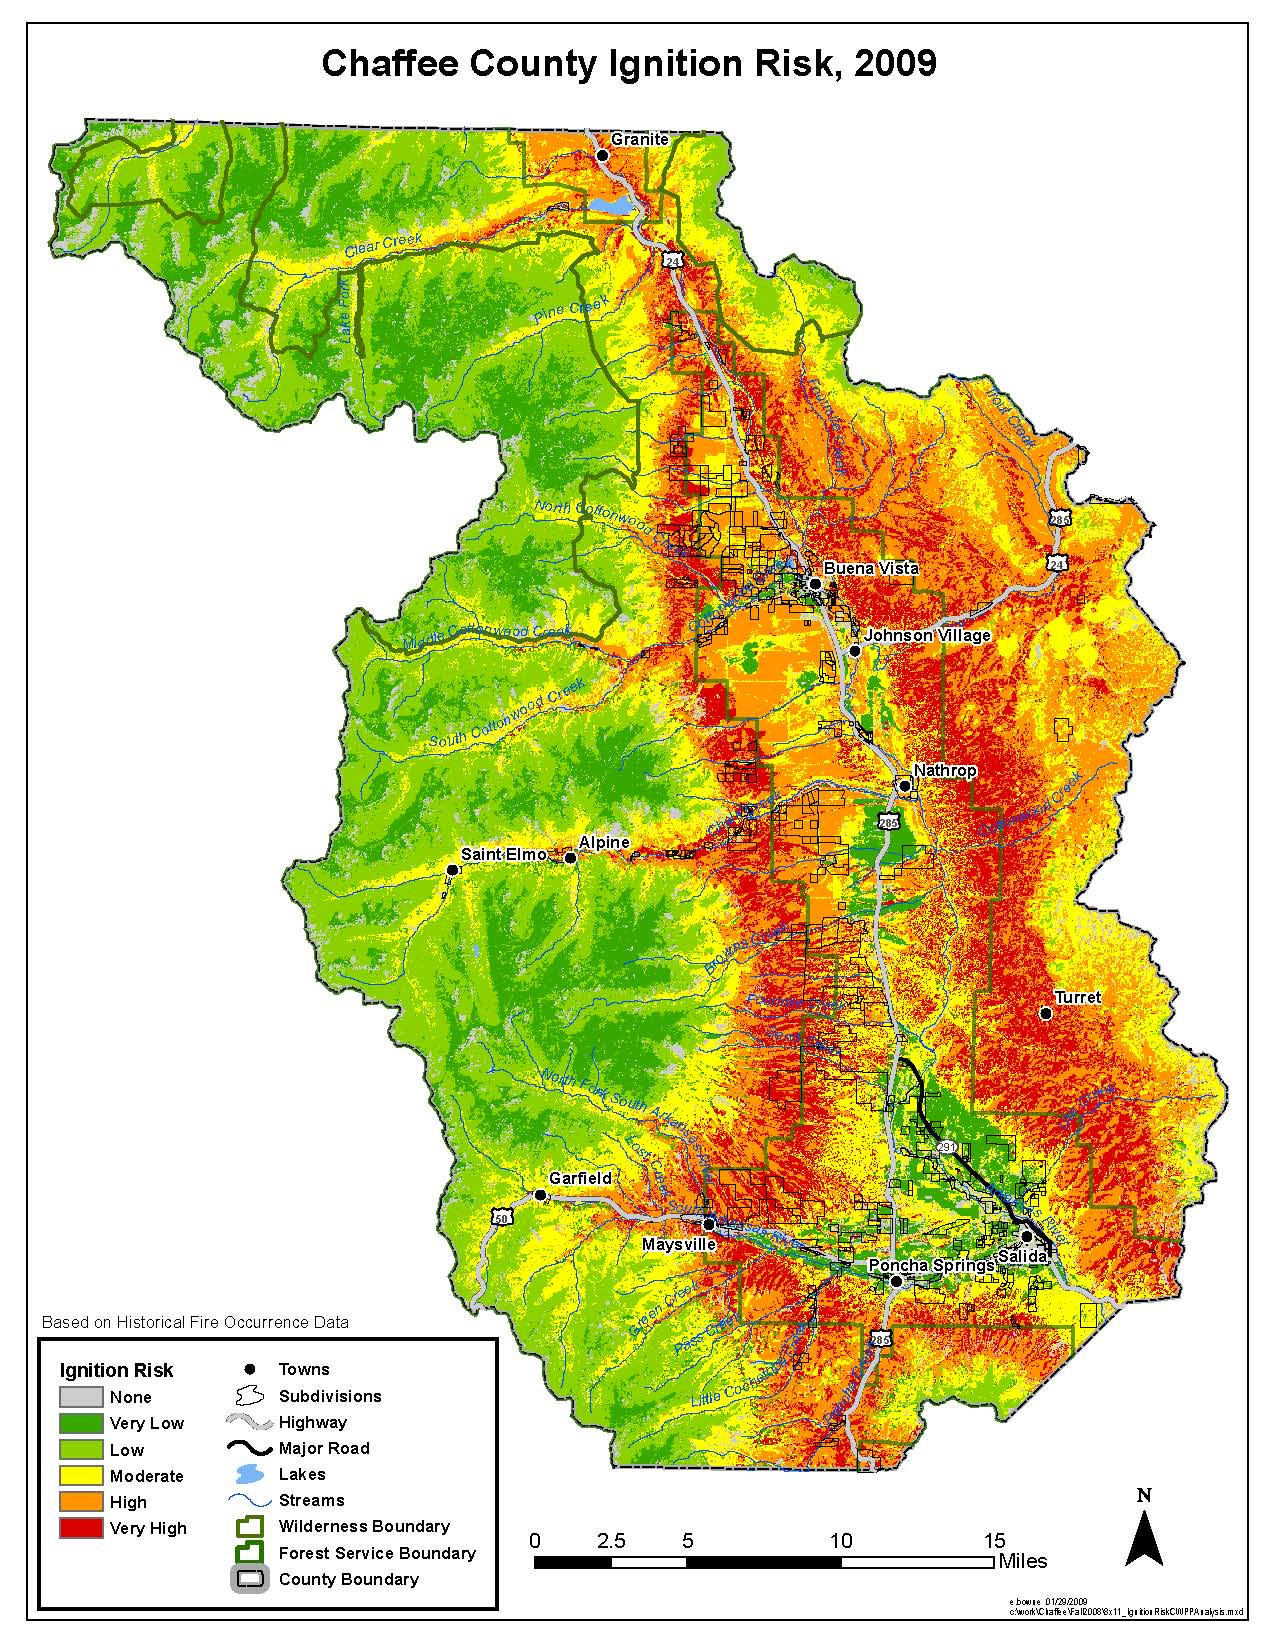 Chaffee County CWPP Overall Risk Rating